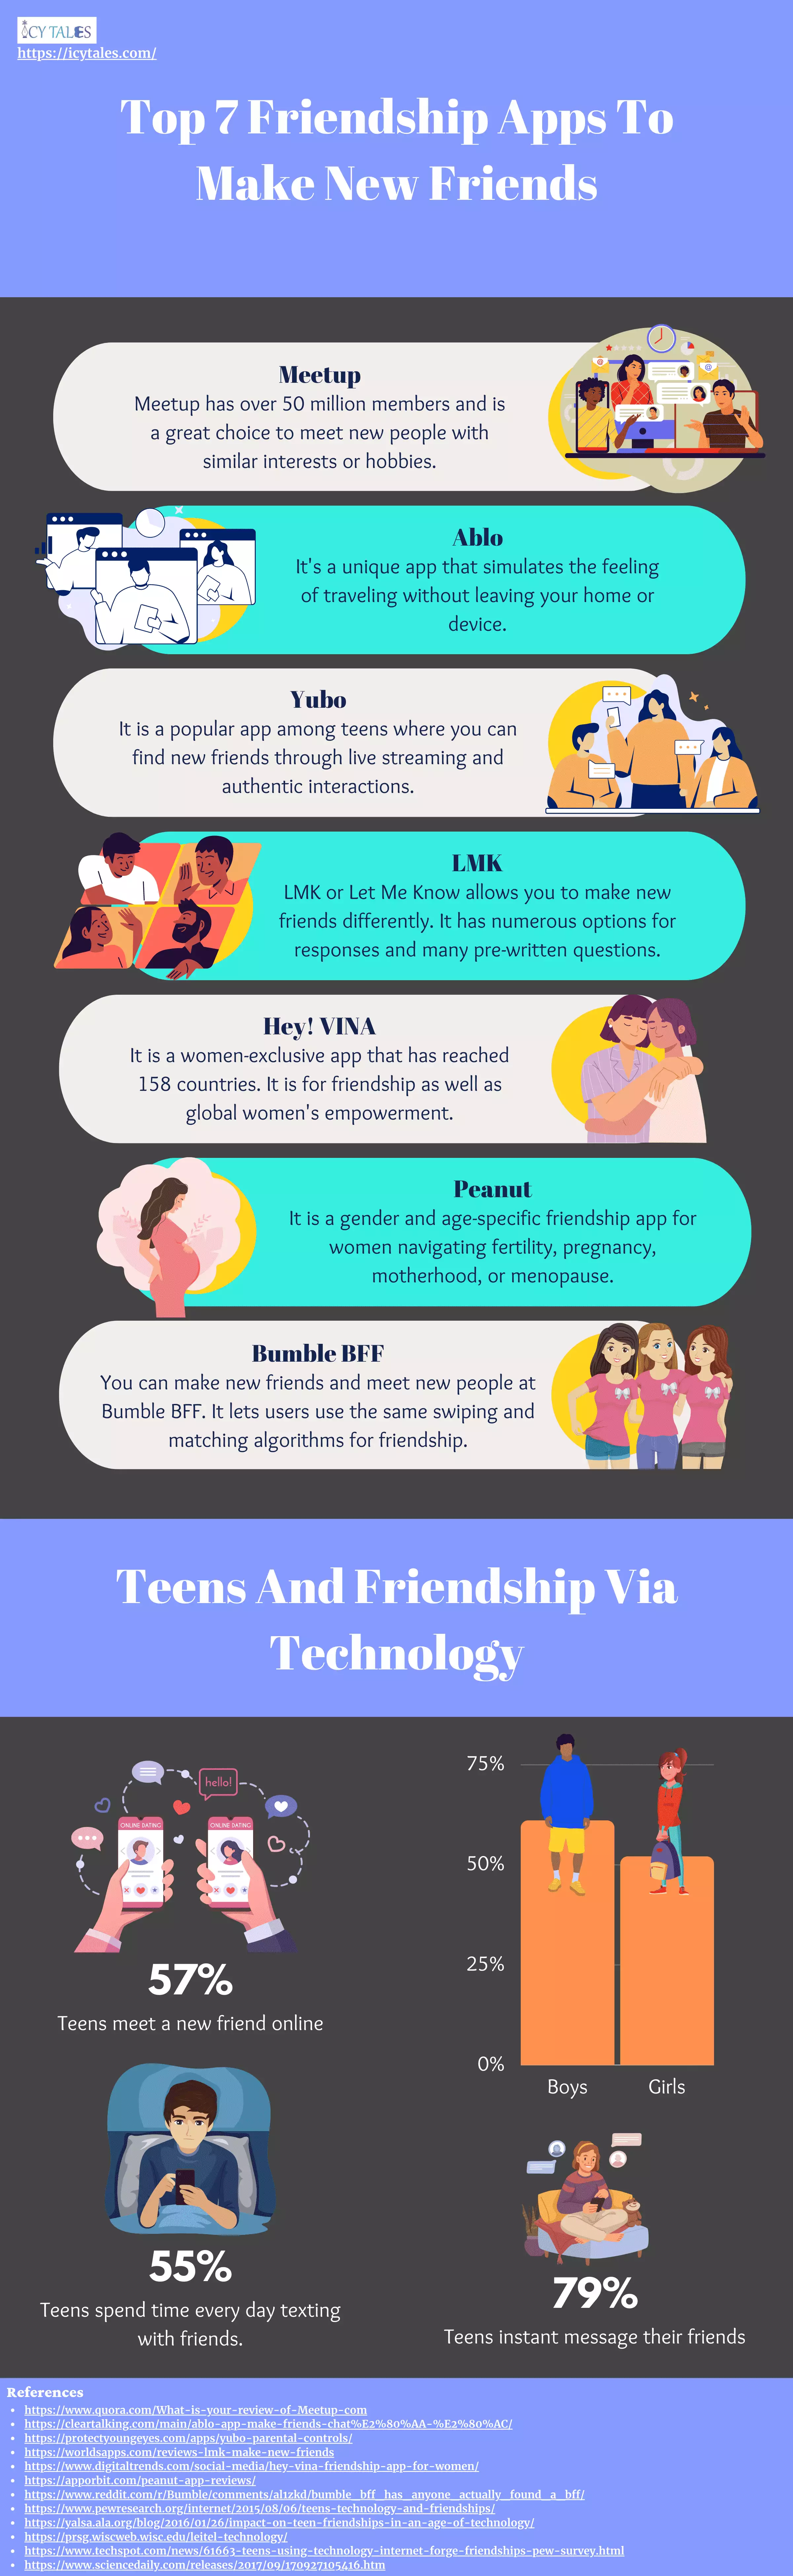 Top 7 Friendship Apps To Make New Friends